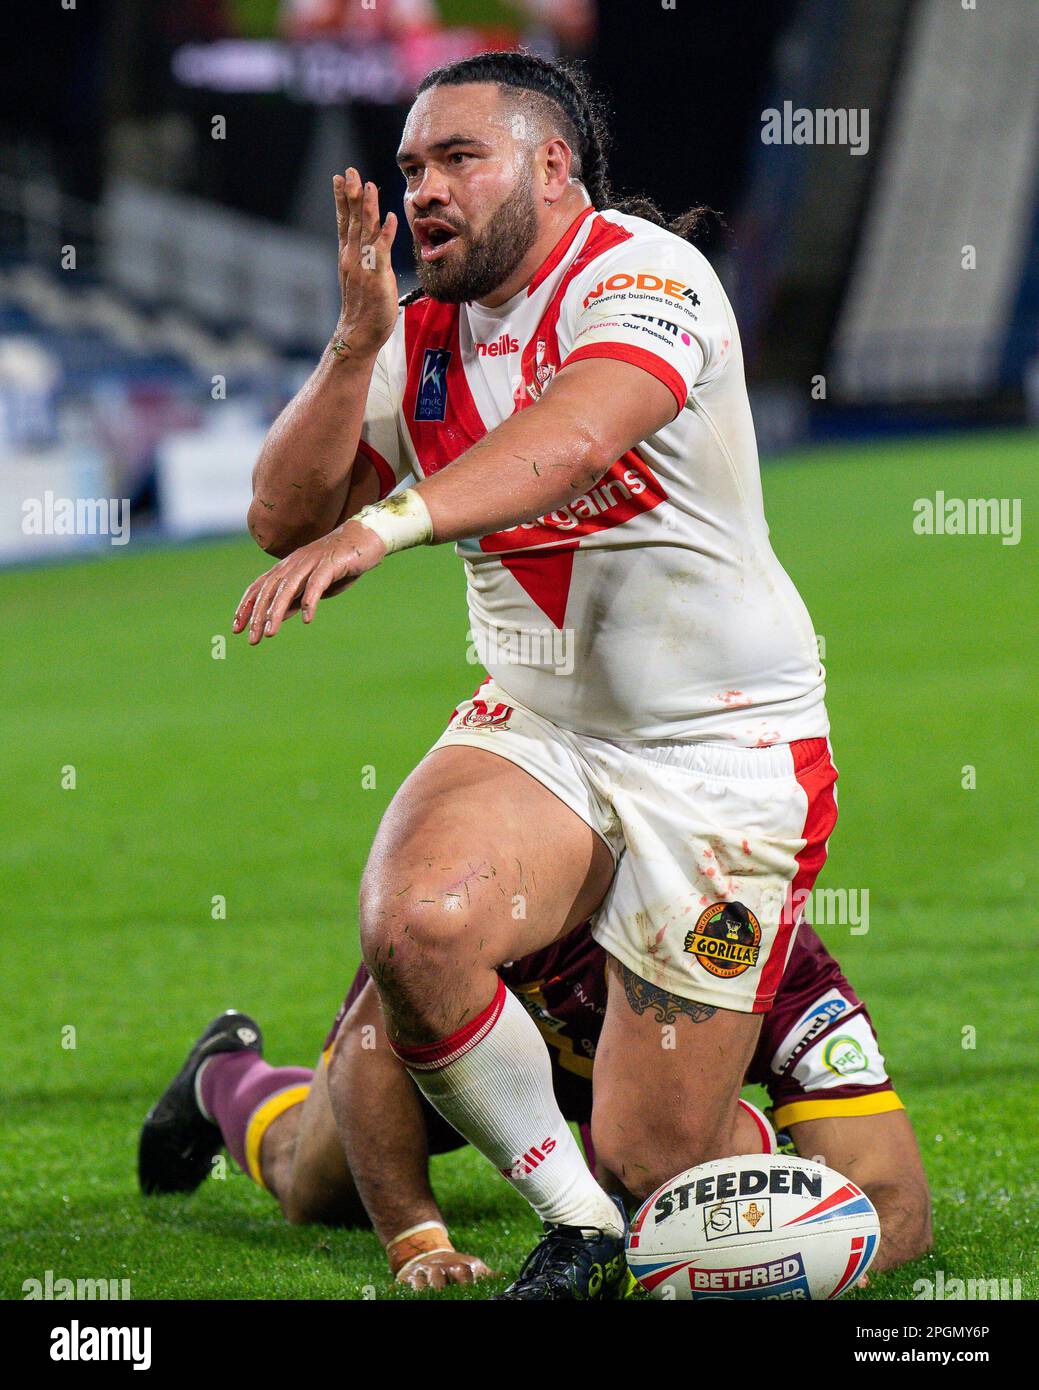 Konrad Hurrell #23 of St Helens celebrates his try by blowing a kiss uring the Betfred Super League Round 6 match Huddersfield Giants vs St Helens at John Smith's Stadium, Huddersfield, United Kingdom, 23rd March 2023  (Photo by Craig Thomas/News Images) Stock Photo